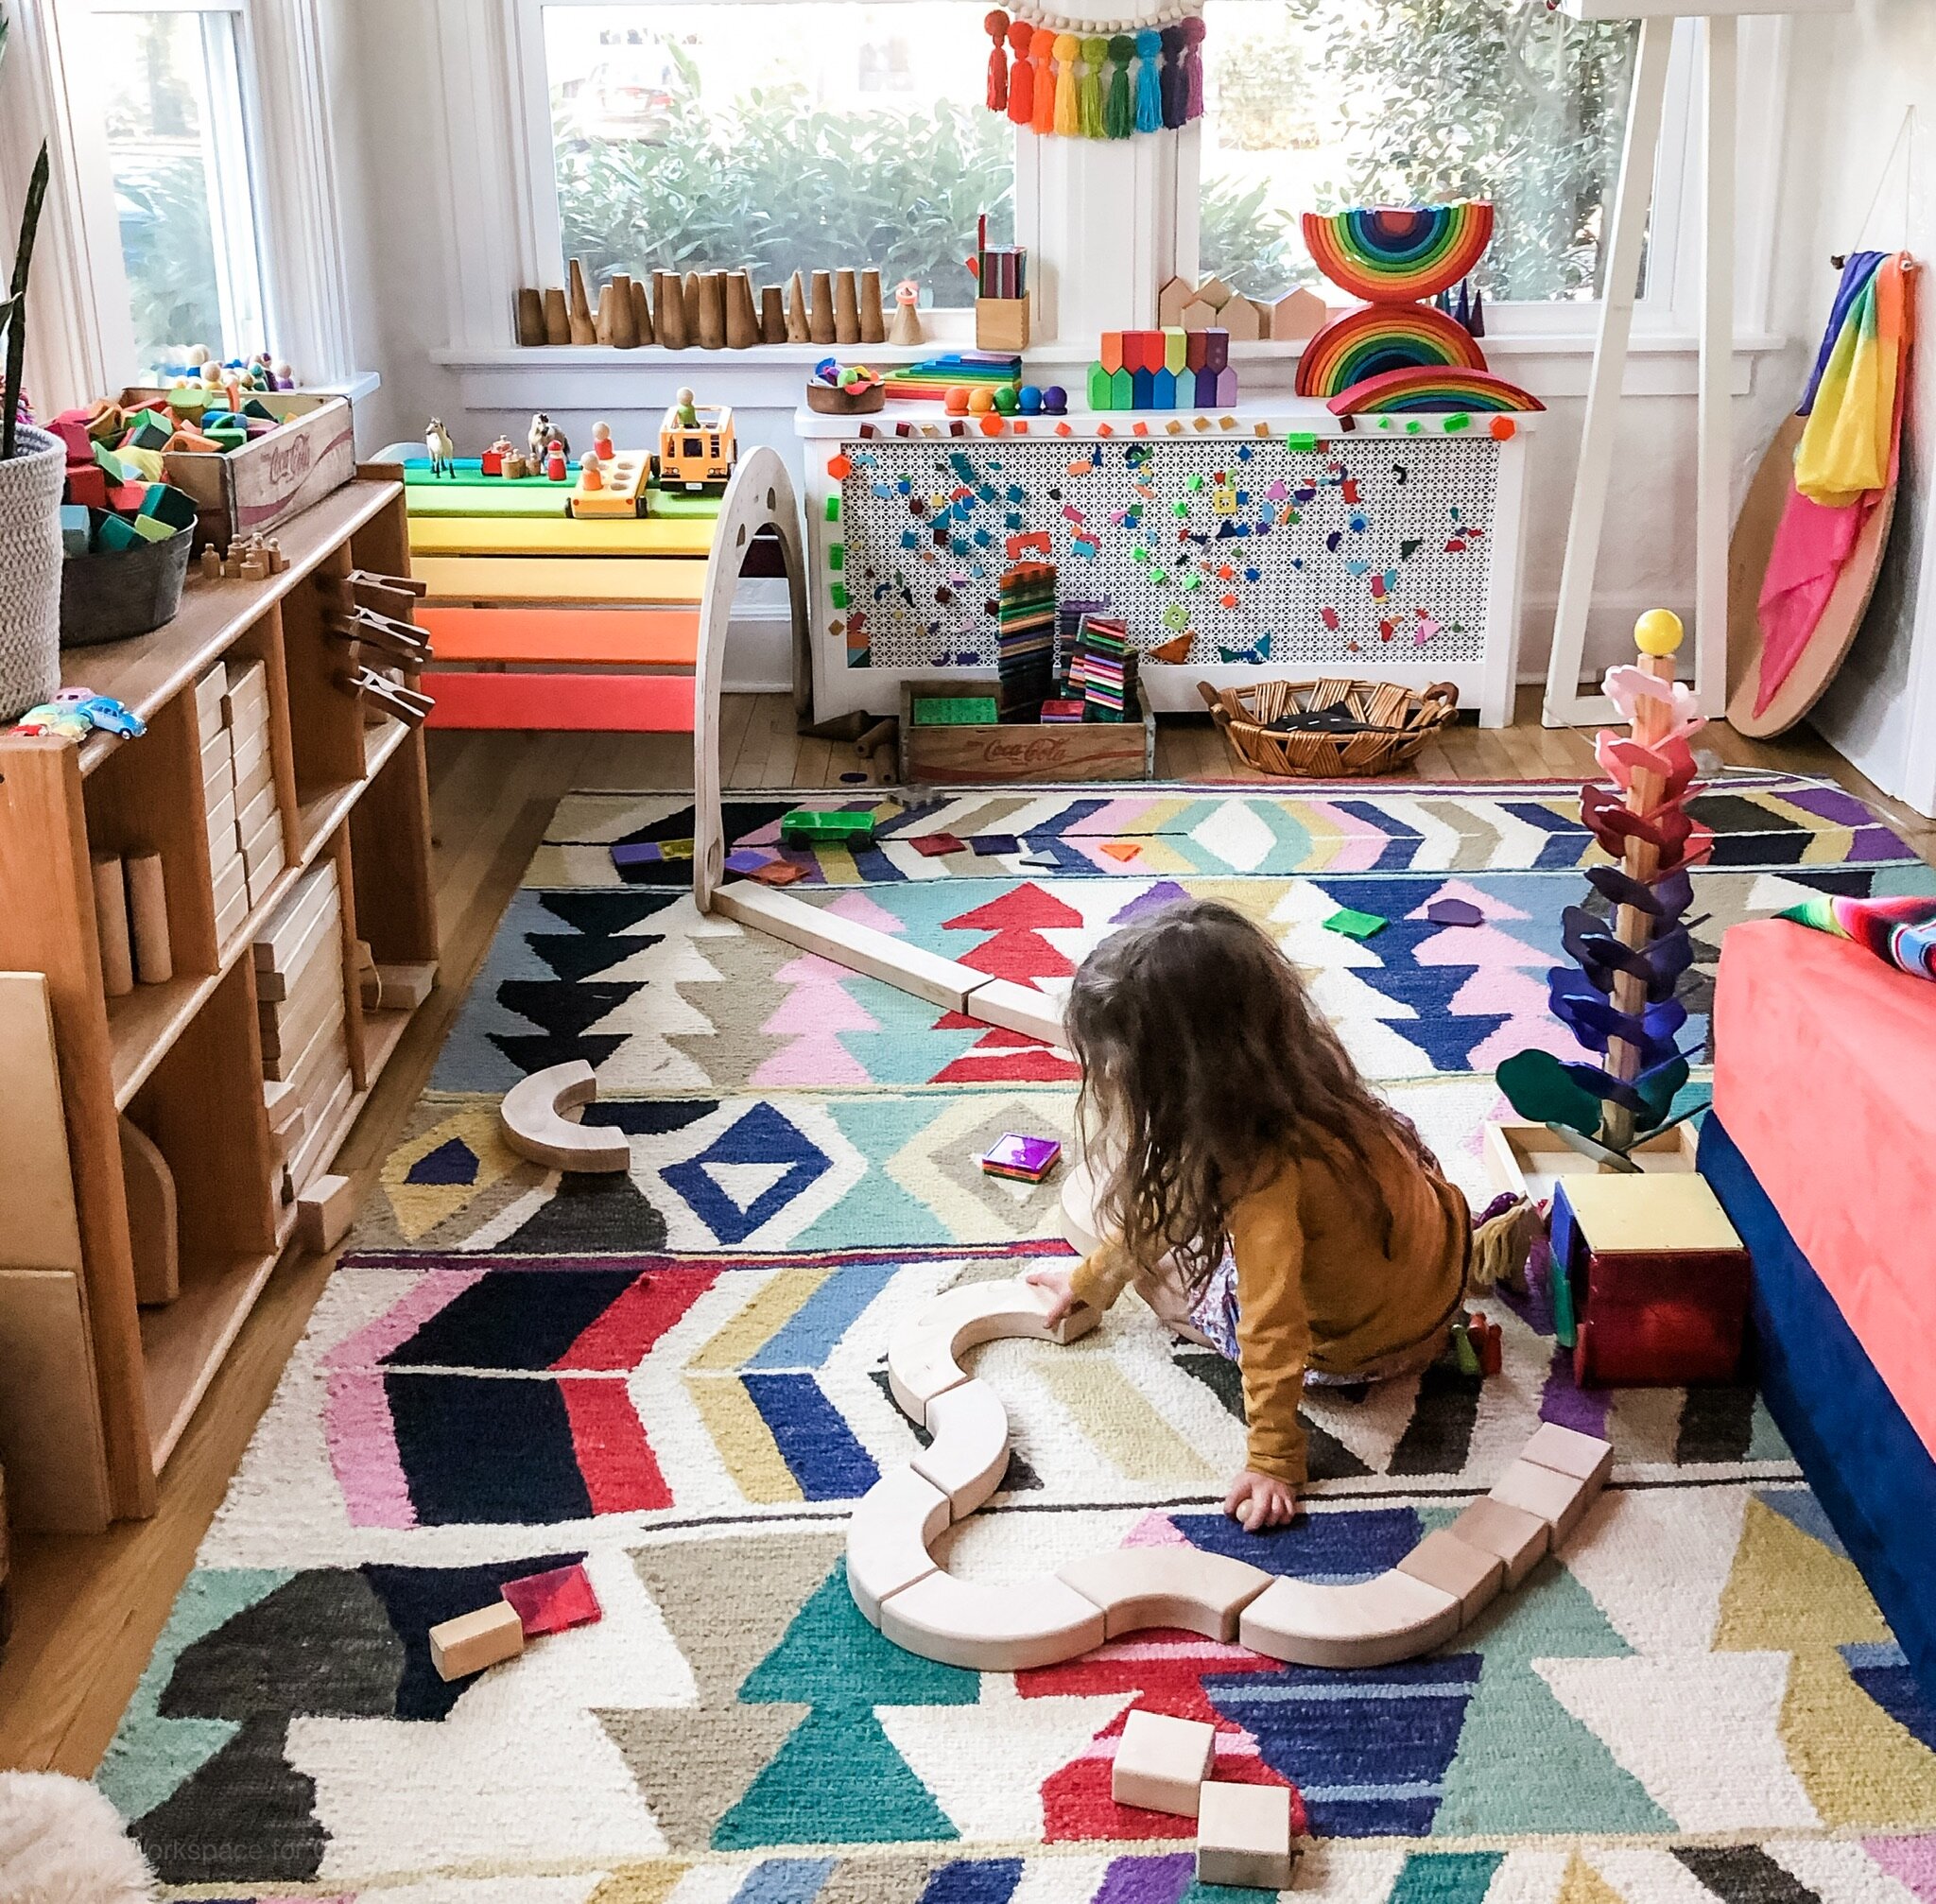 How to Create A Playroom That Will Grow With Your Child